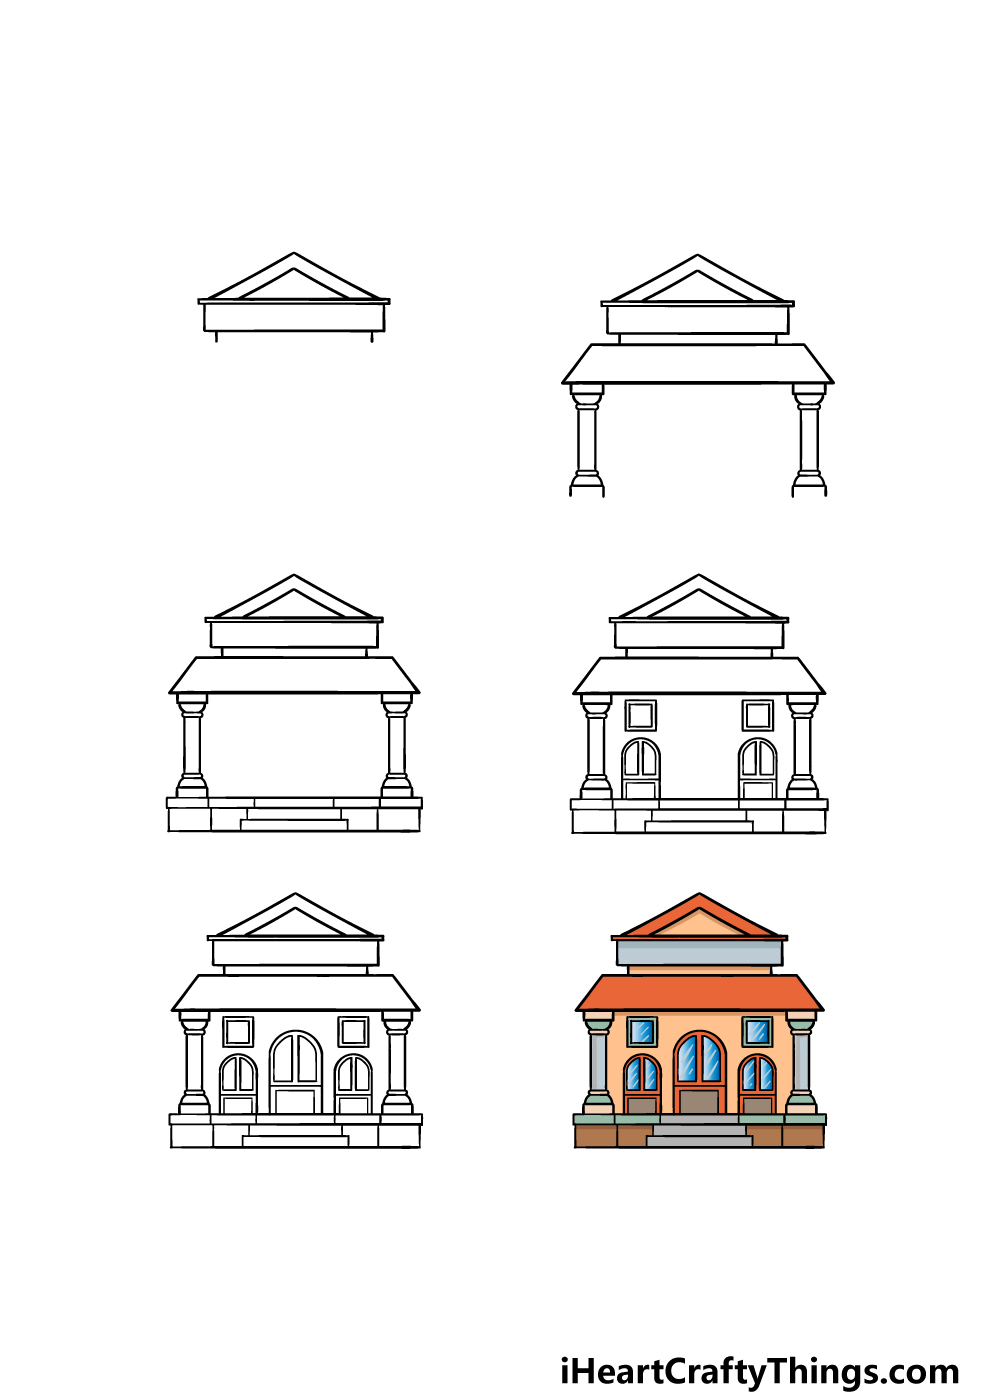 how to draw a Library in 6 steps